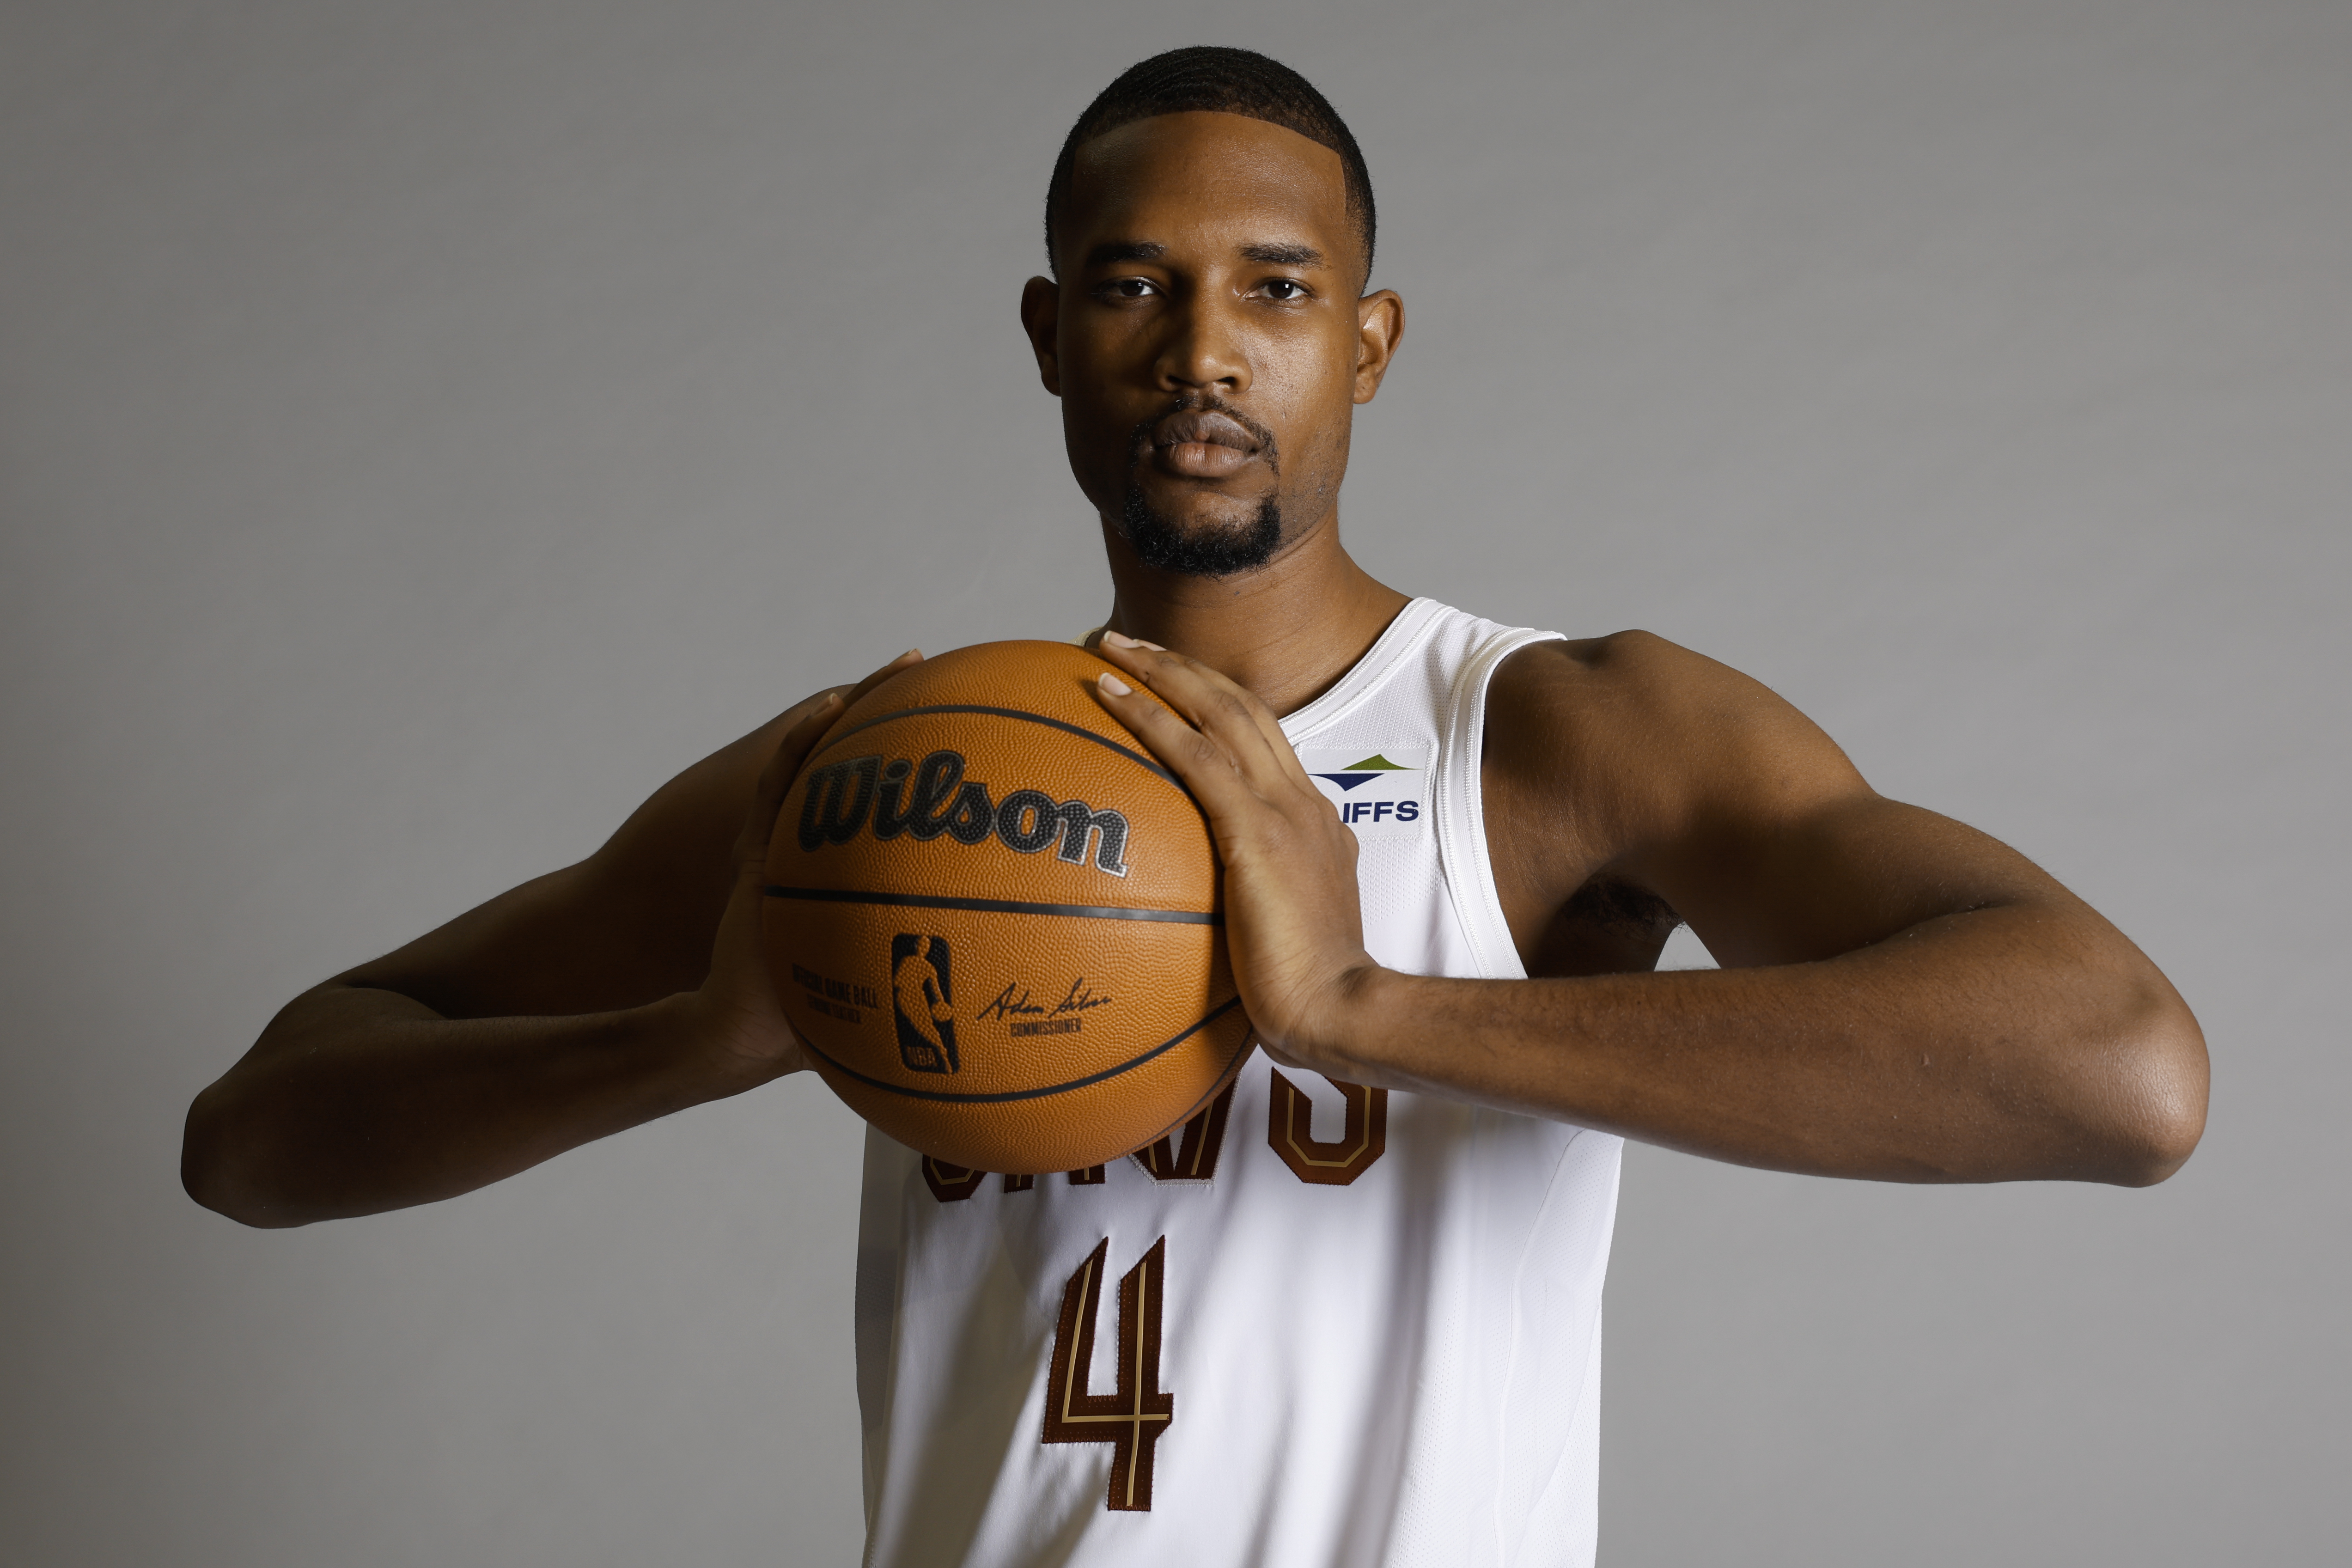 An NBA championship for the Cavs? Hall of Fame? Evan Mobley is